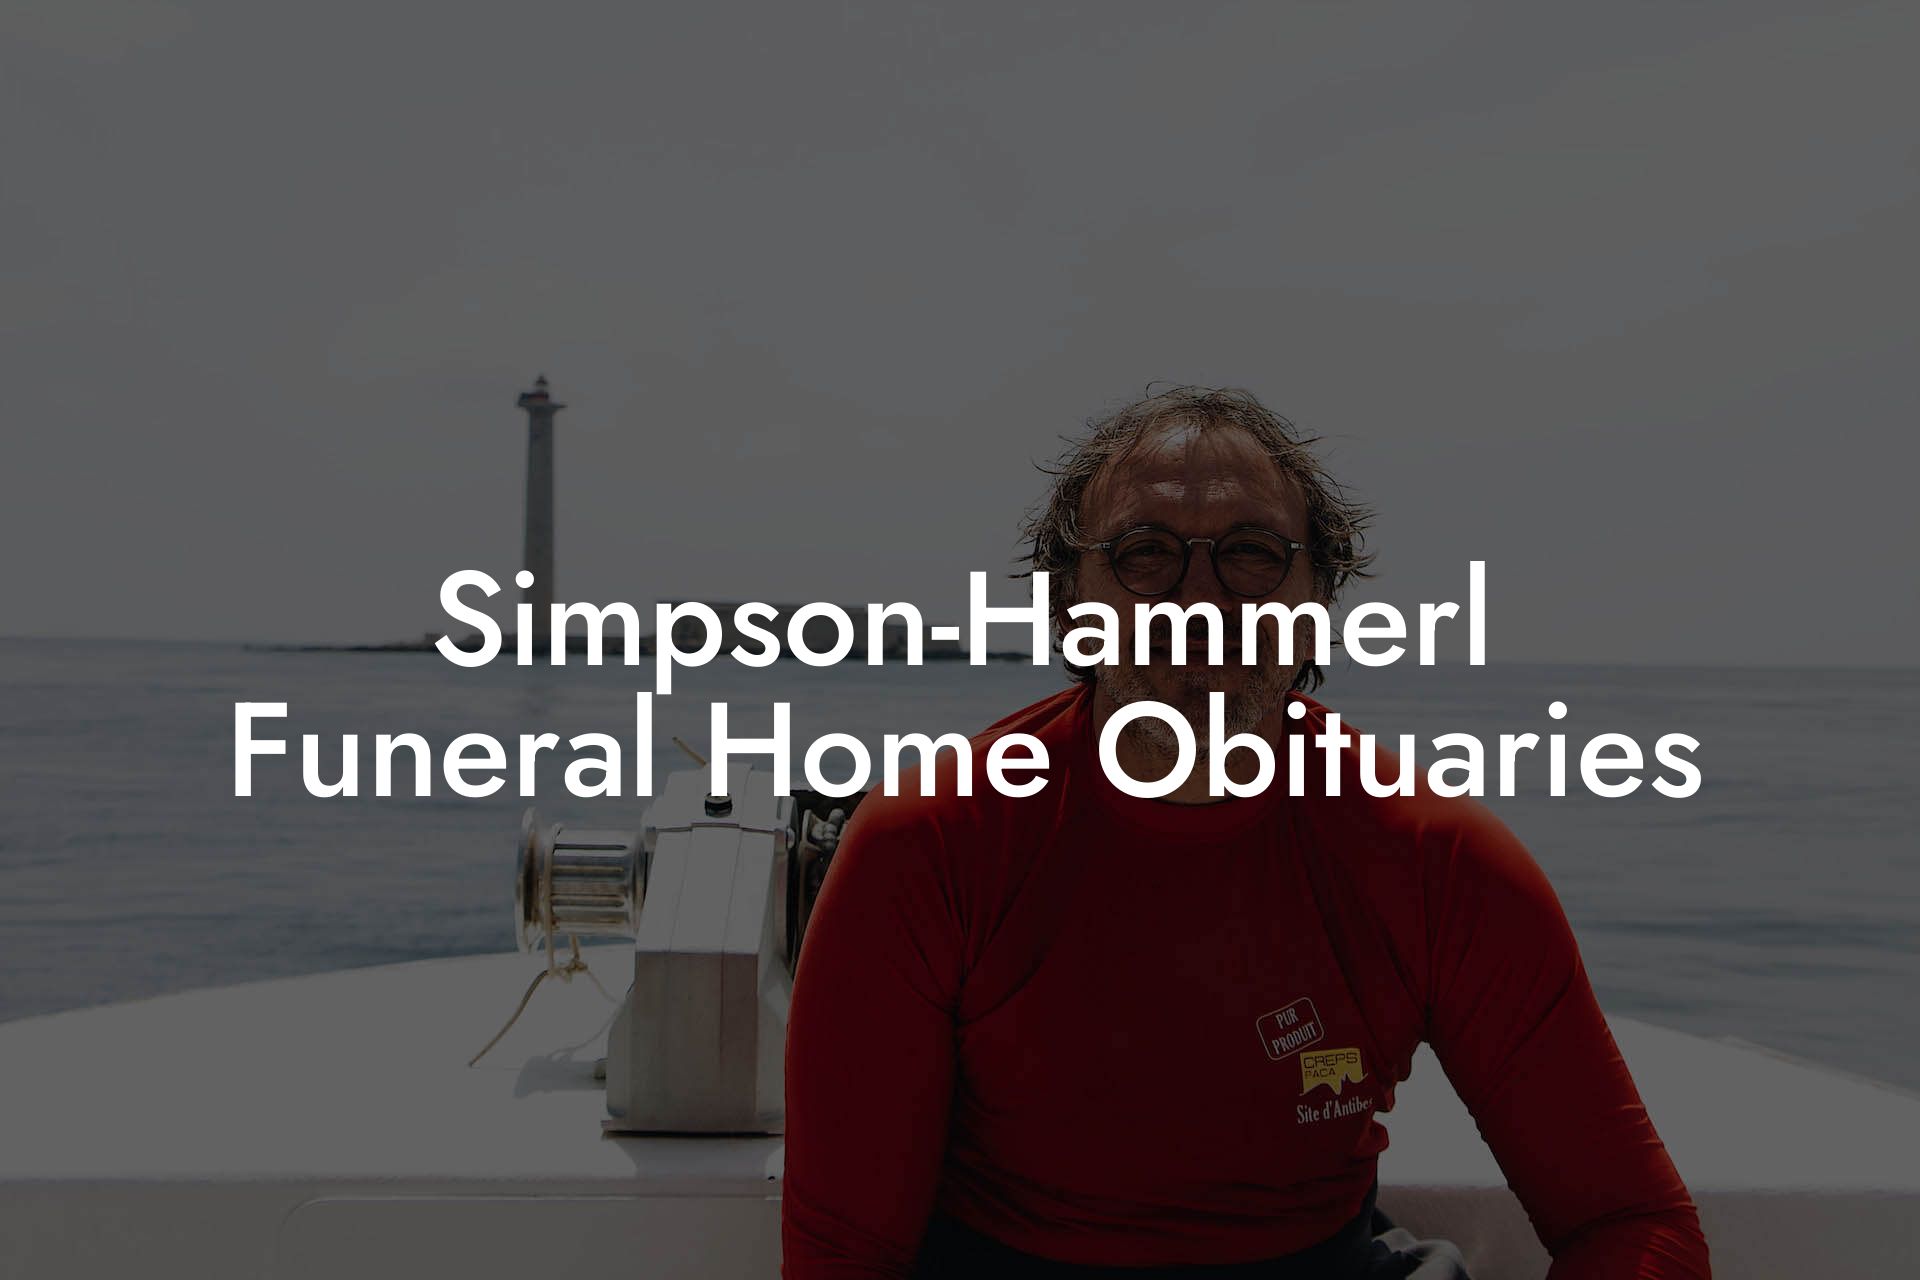 Simpson-Hammerl Funeral Home Obituaries